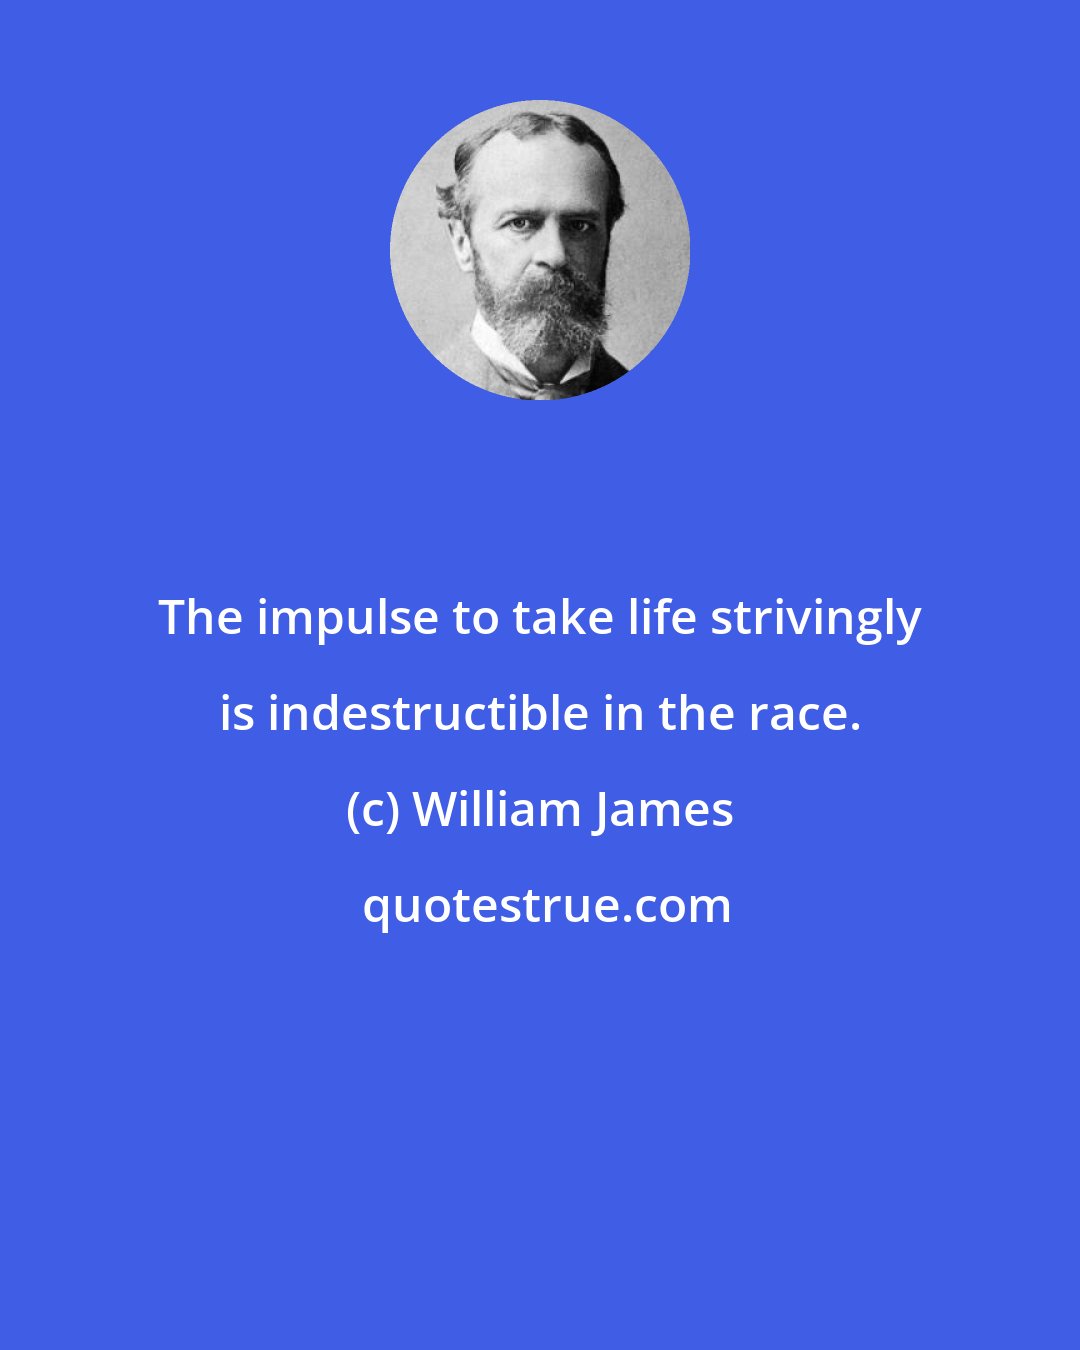 William James: The impulse to take life strivingly is indestructible in the race.